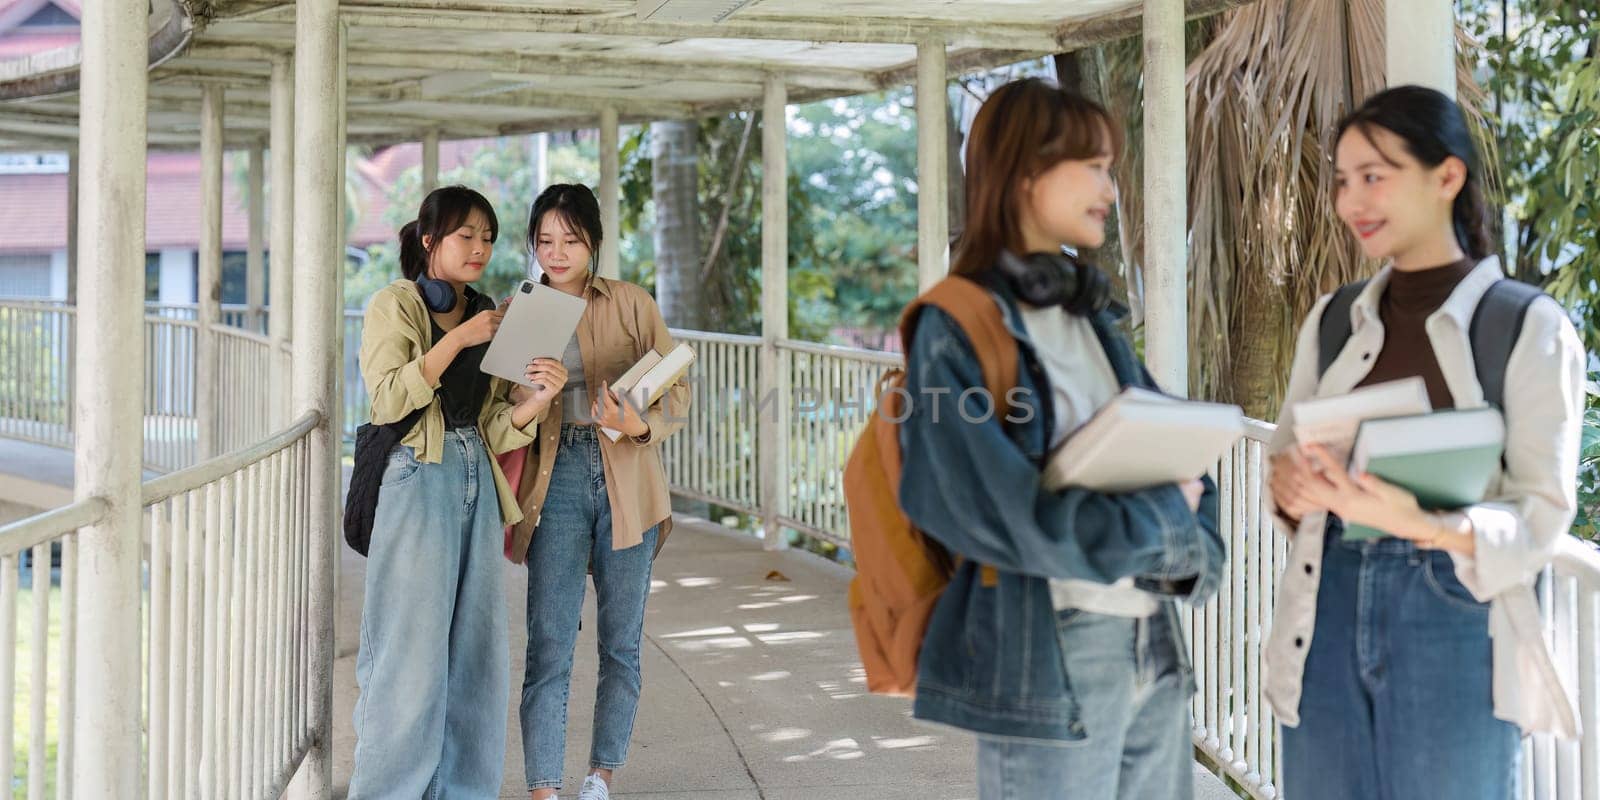 university students using a digital tablet while walking to next class by itchaznong